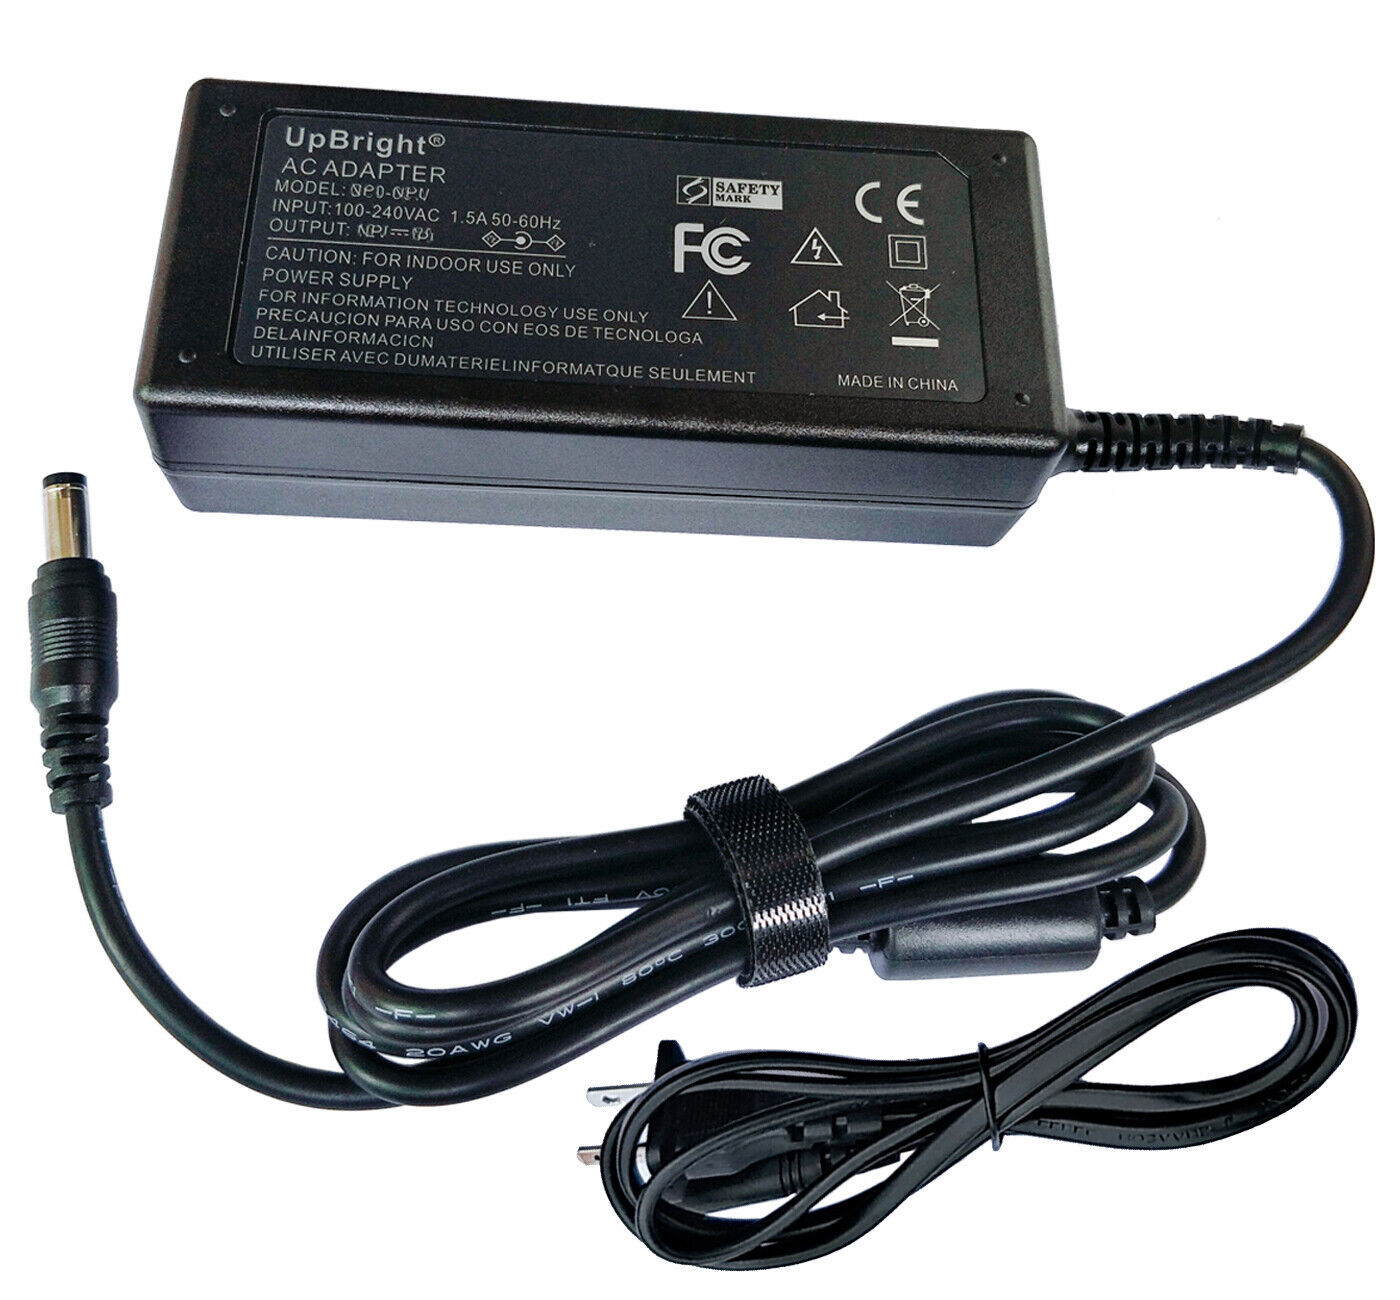 Primary image for 12V Ac/Dc Adapter For At&T U-Verse Vip2250 Vip1250 Vip2200 Motorola Box Recorder